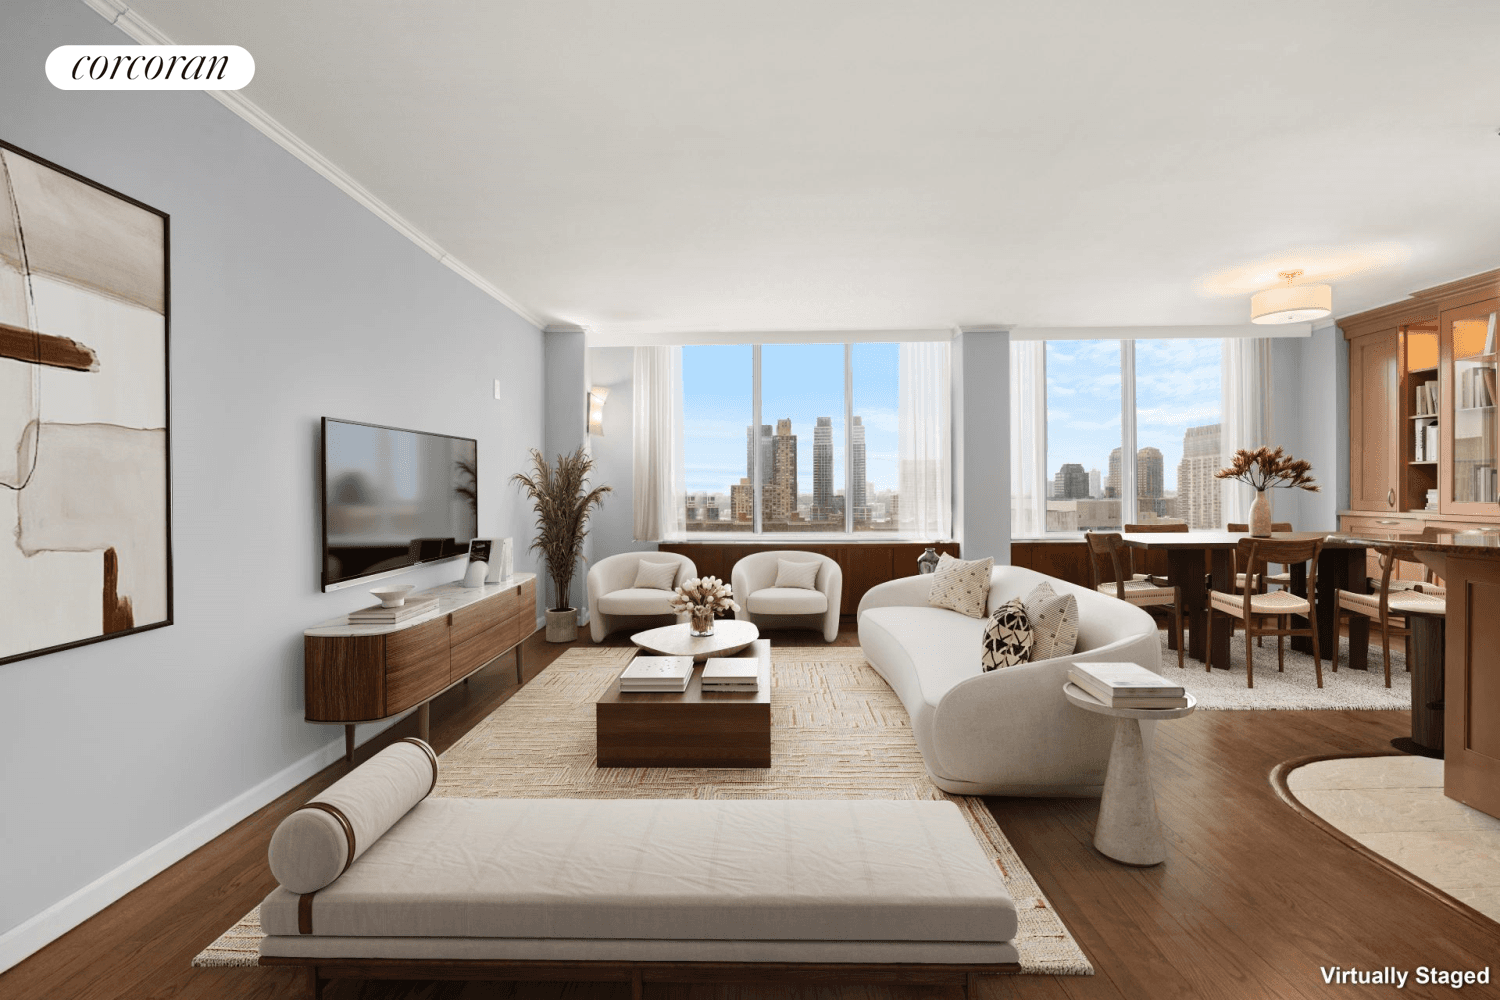 High floor four bedroom, three bath residence in one of the Upper West Side's most coveted cooperatives, the Harmony.